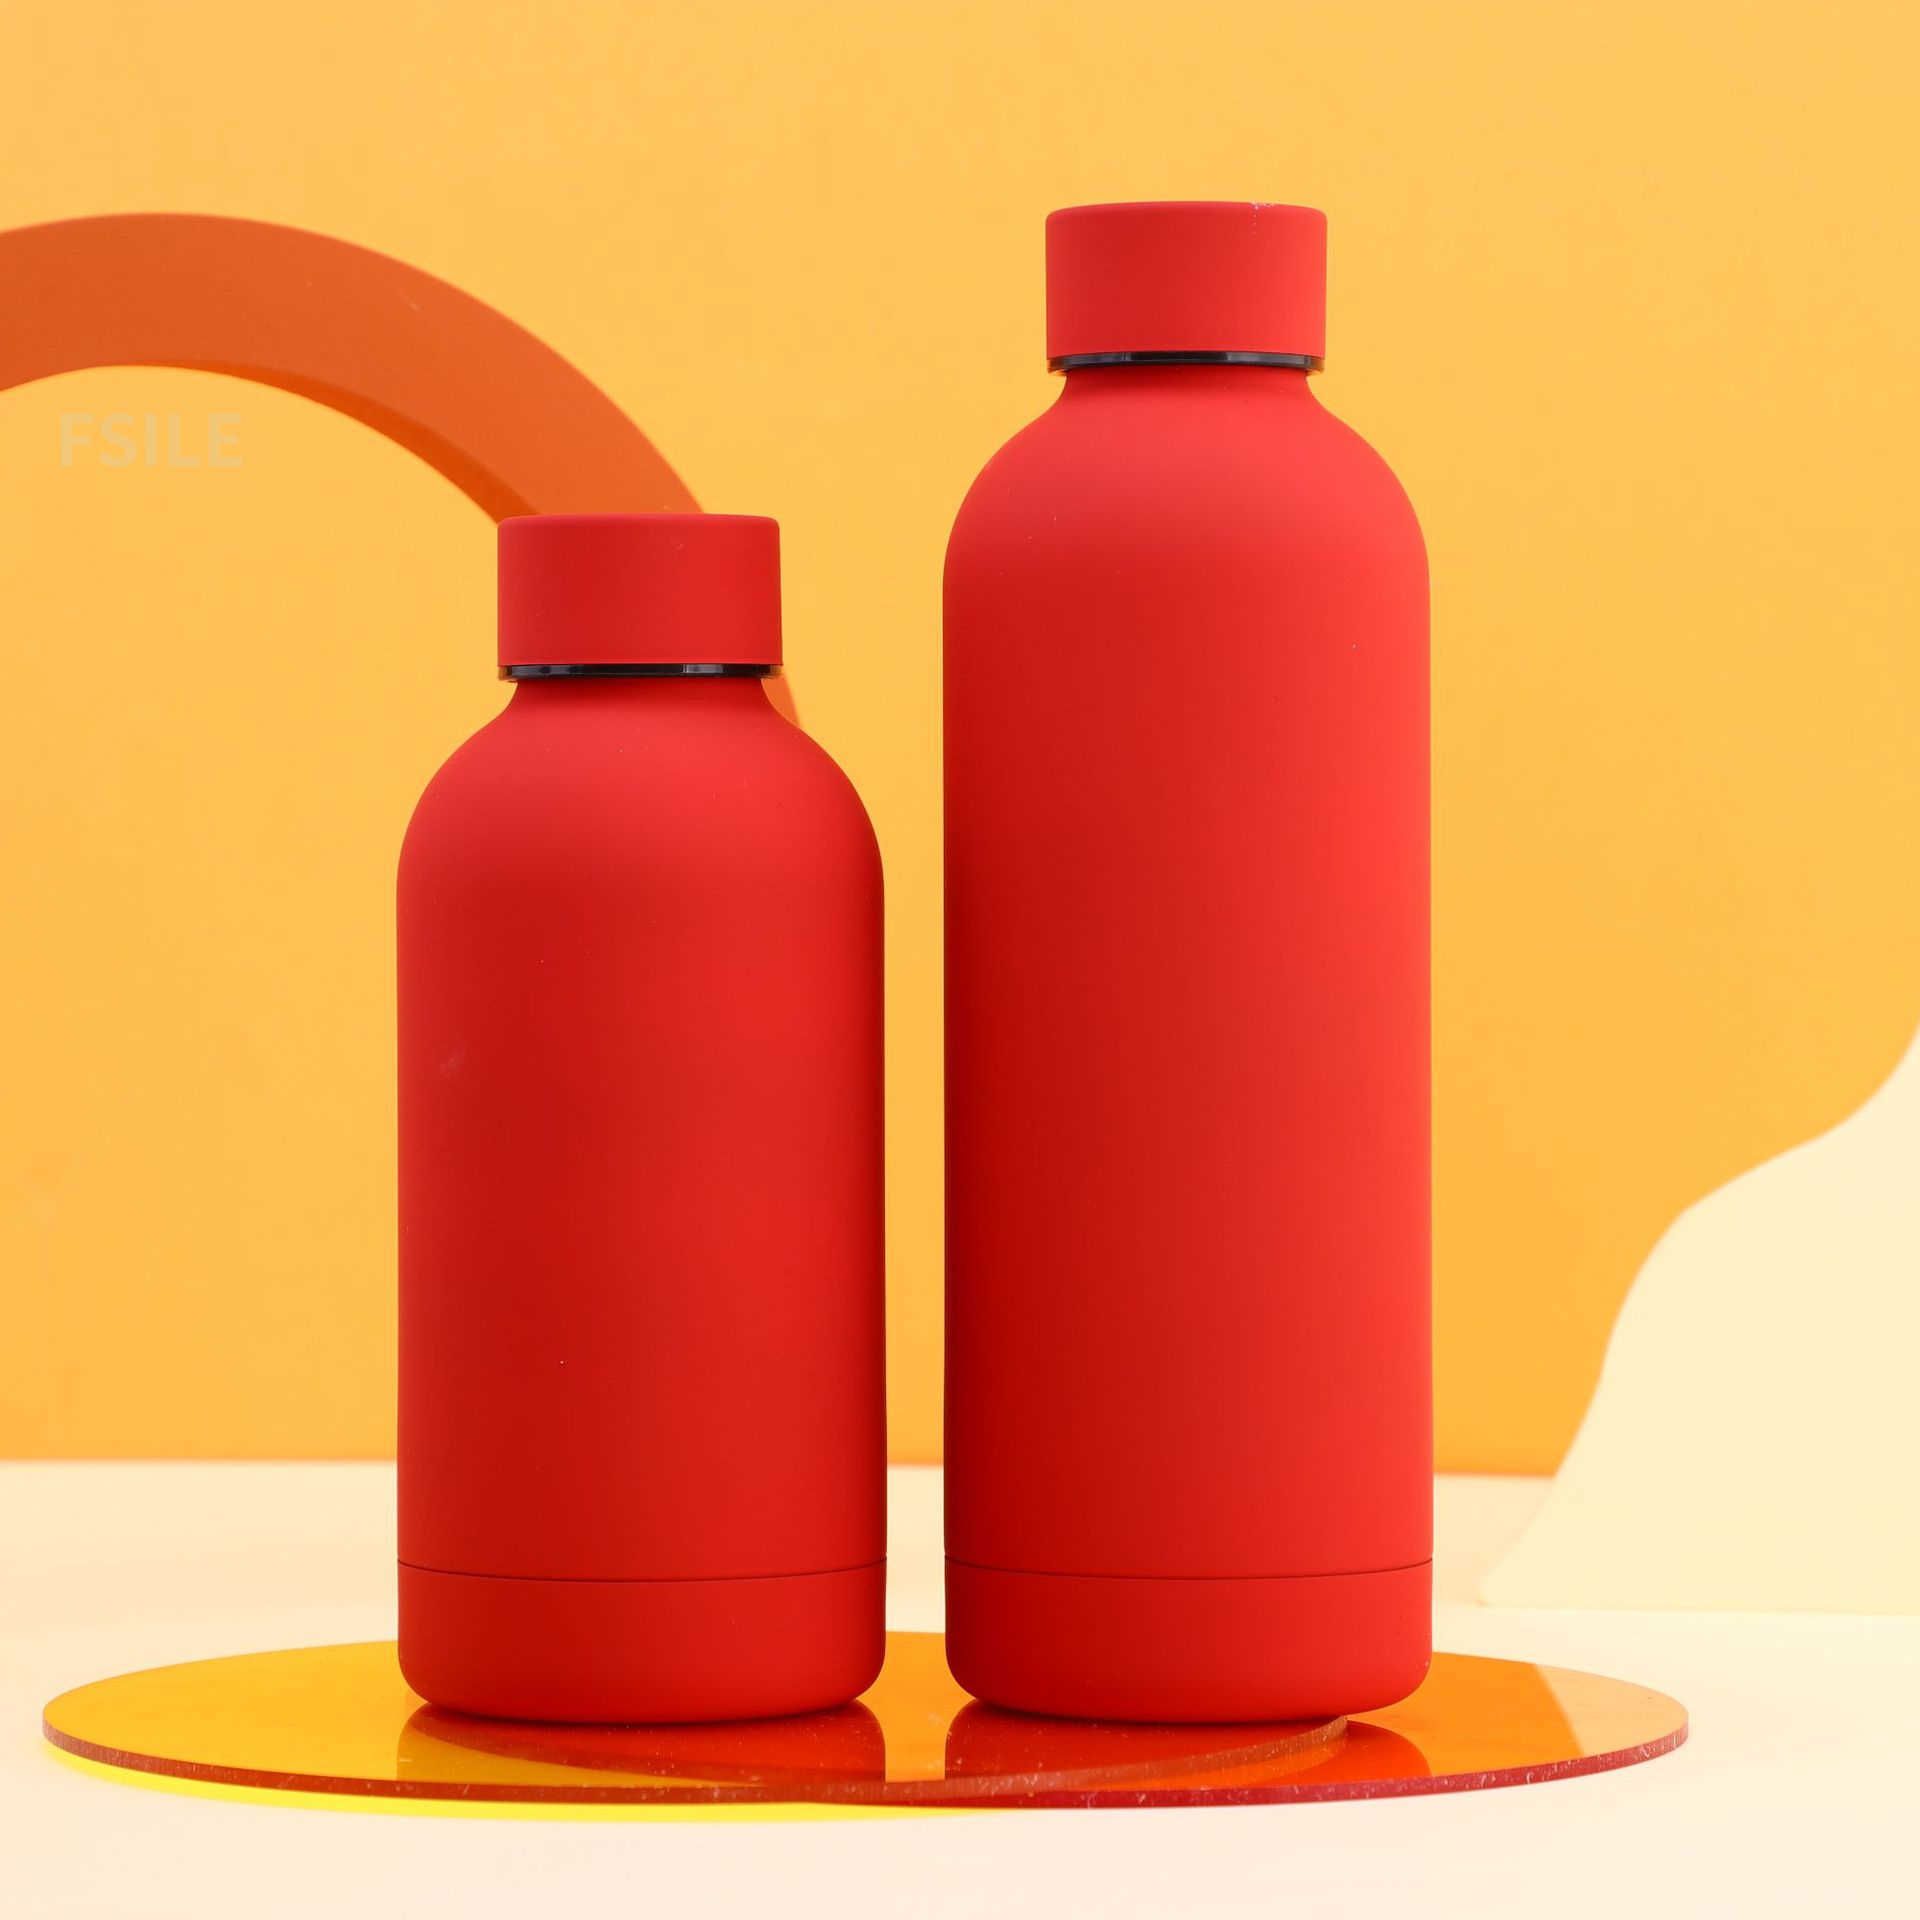 Red-750ml